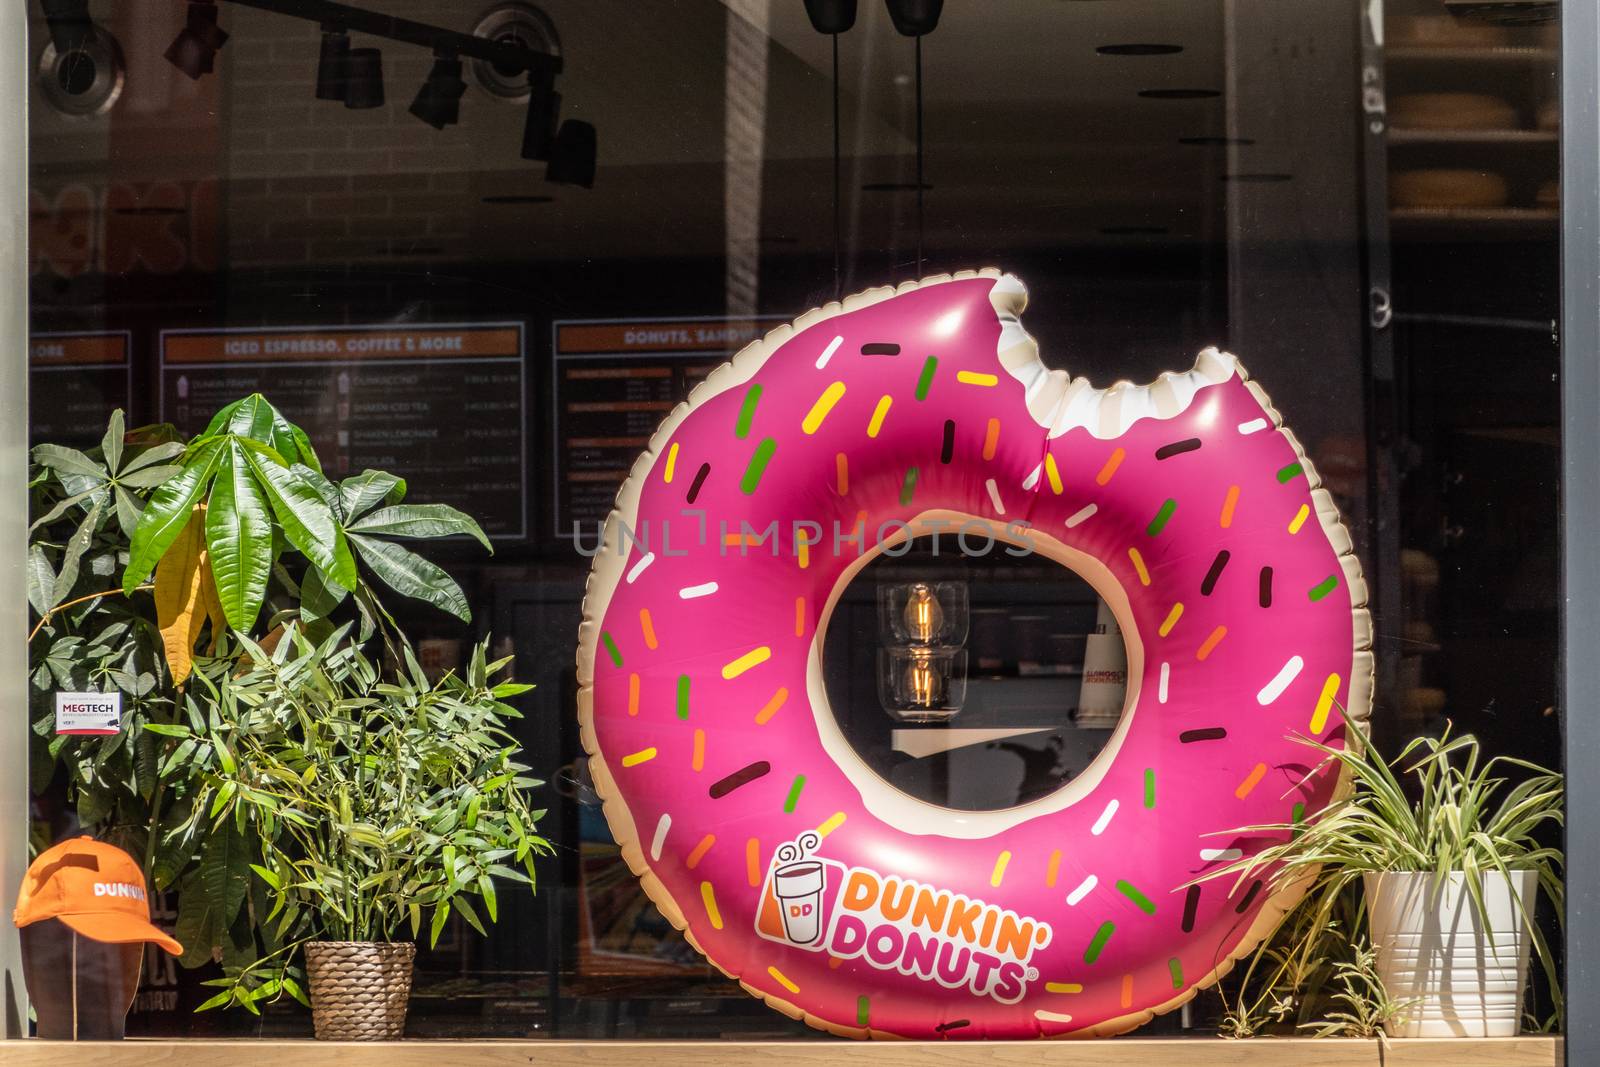 Dunkin Donuts shop in Amsterdam, the Netherlands. by Claudine